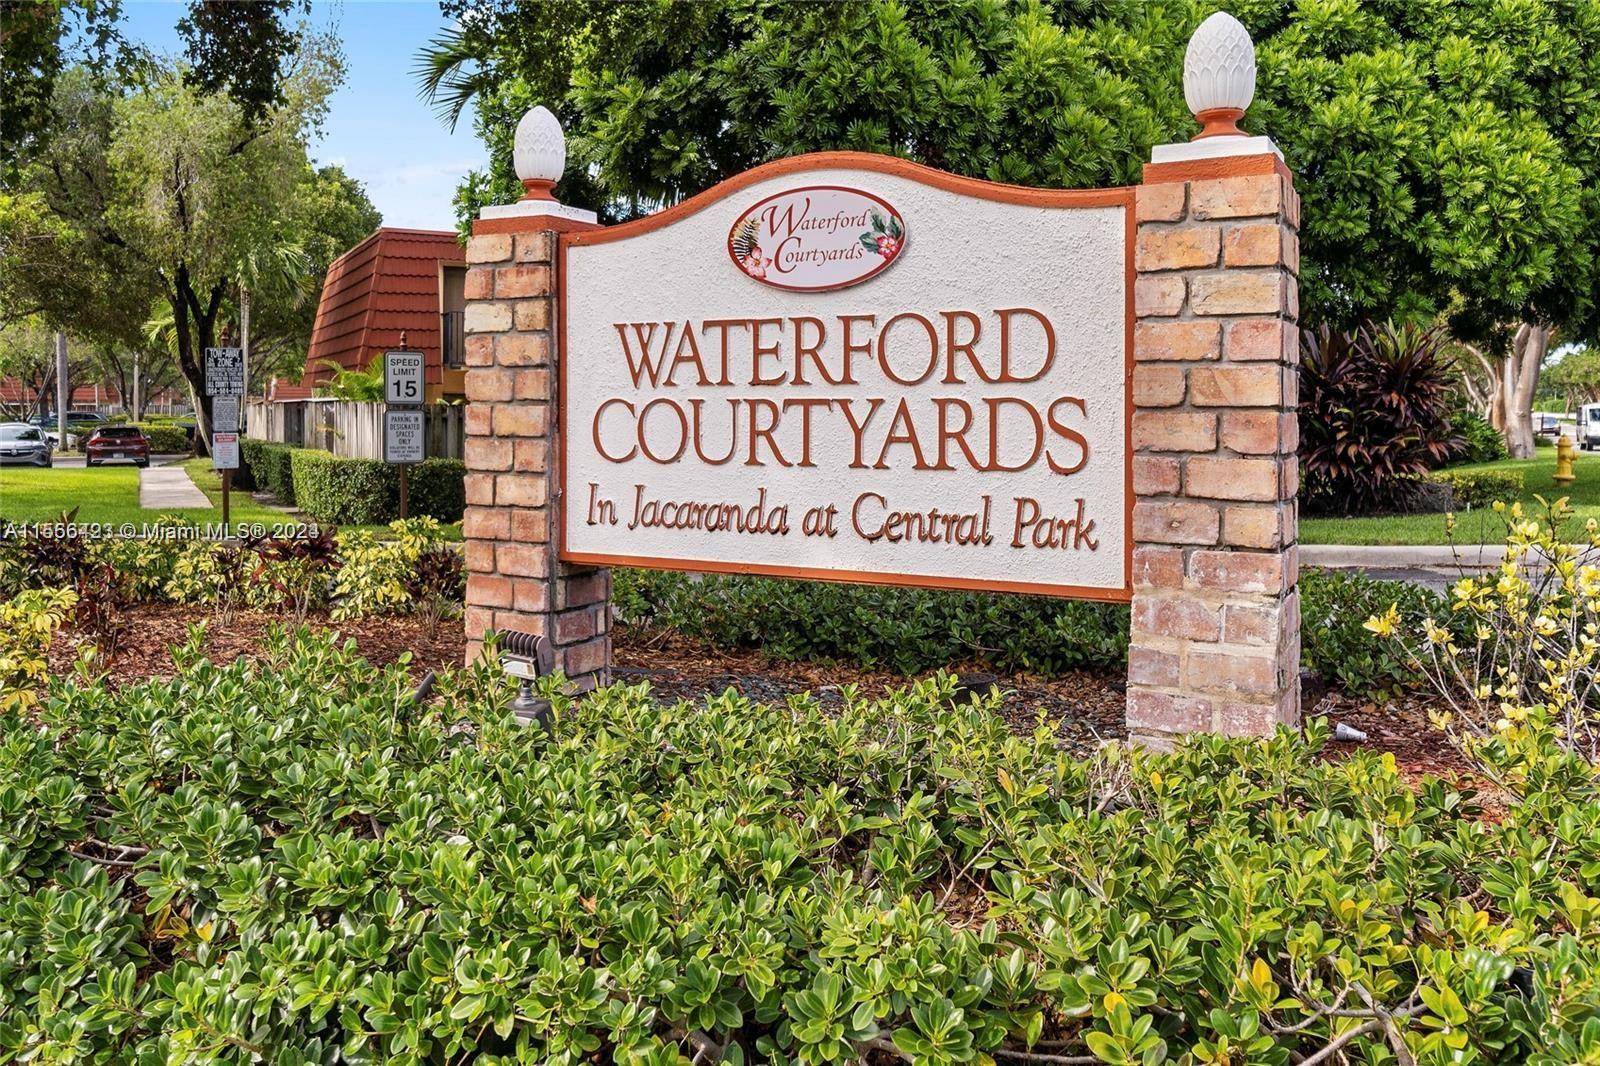 Discover your dream home in Plantation's Waterford Courtyard with this stunning 2 bedroom, 2.